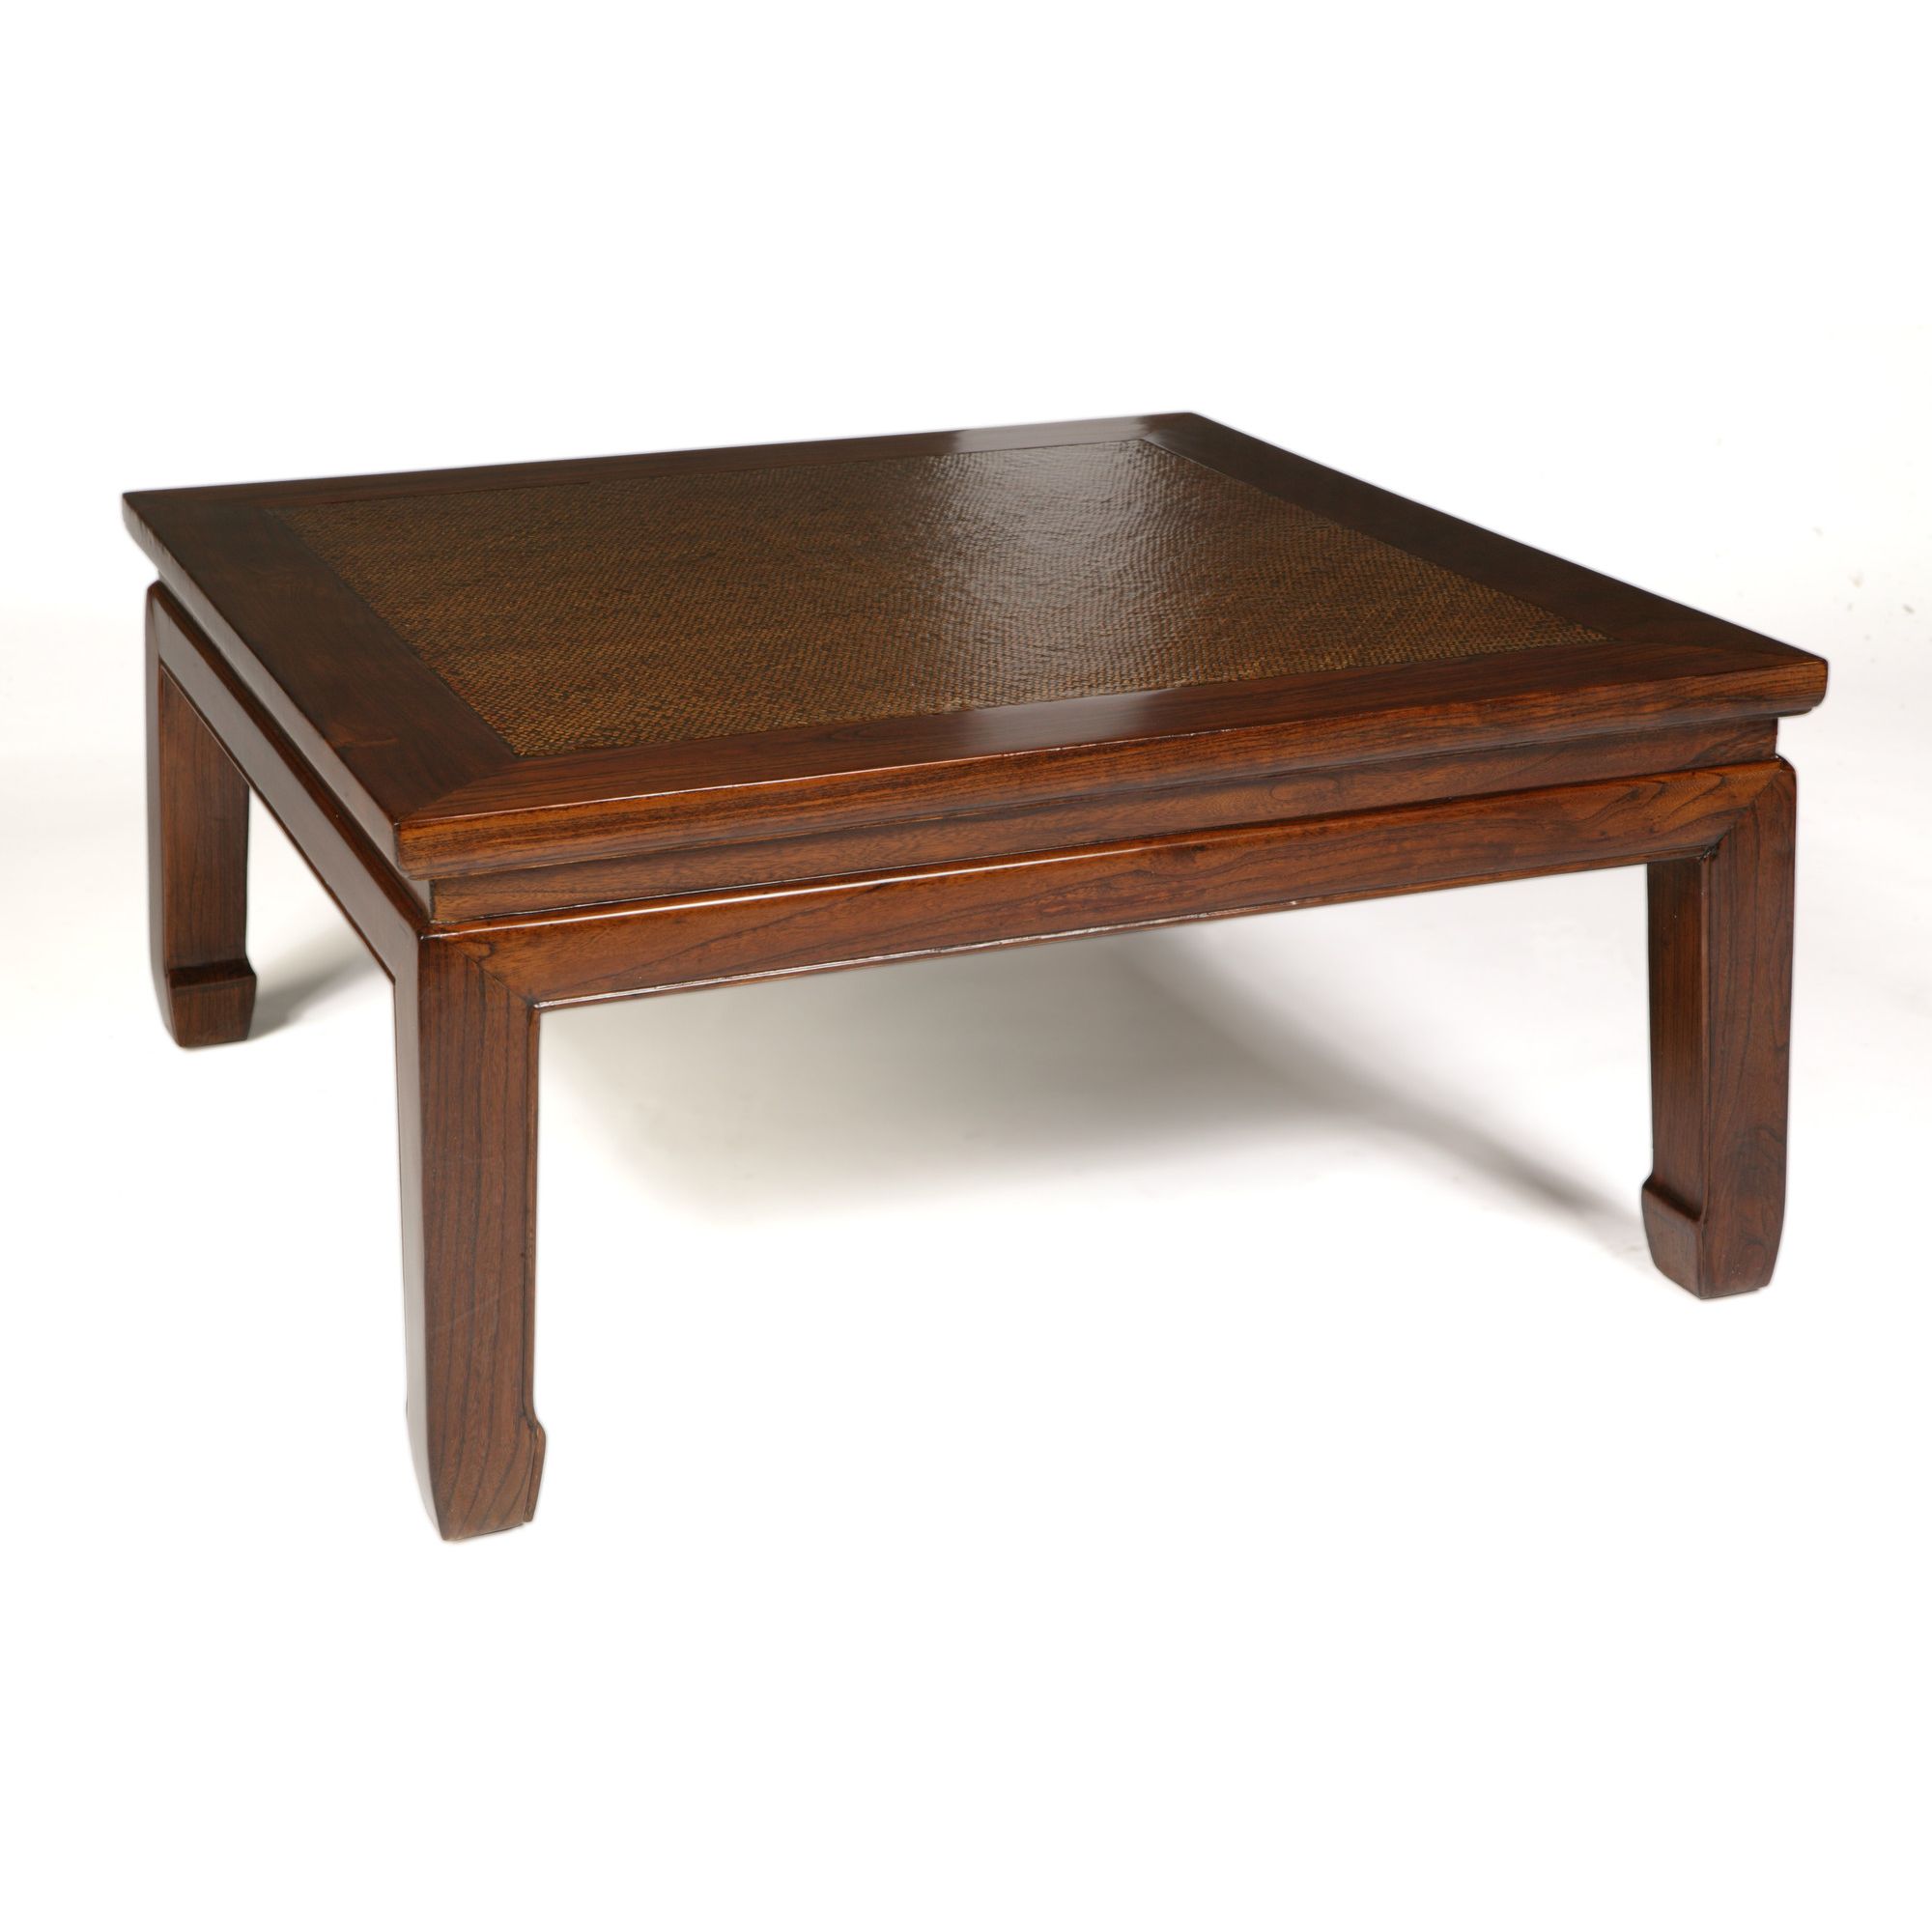 Shimu Chinese Classical Square Daybed Table - Warm Elm at Tescos Direct